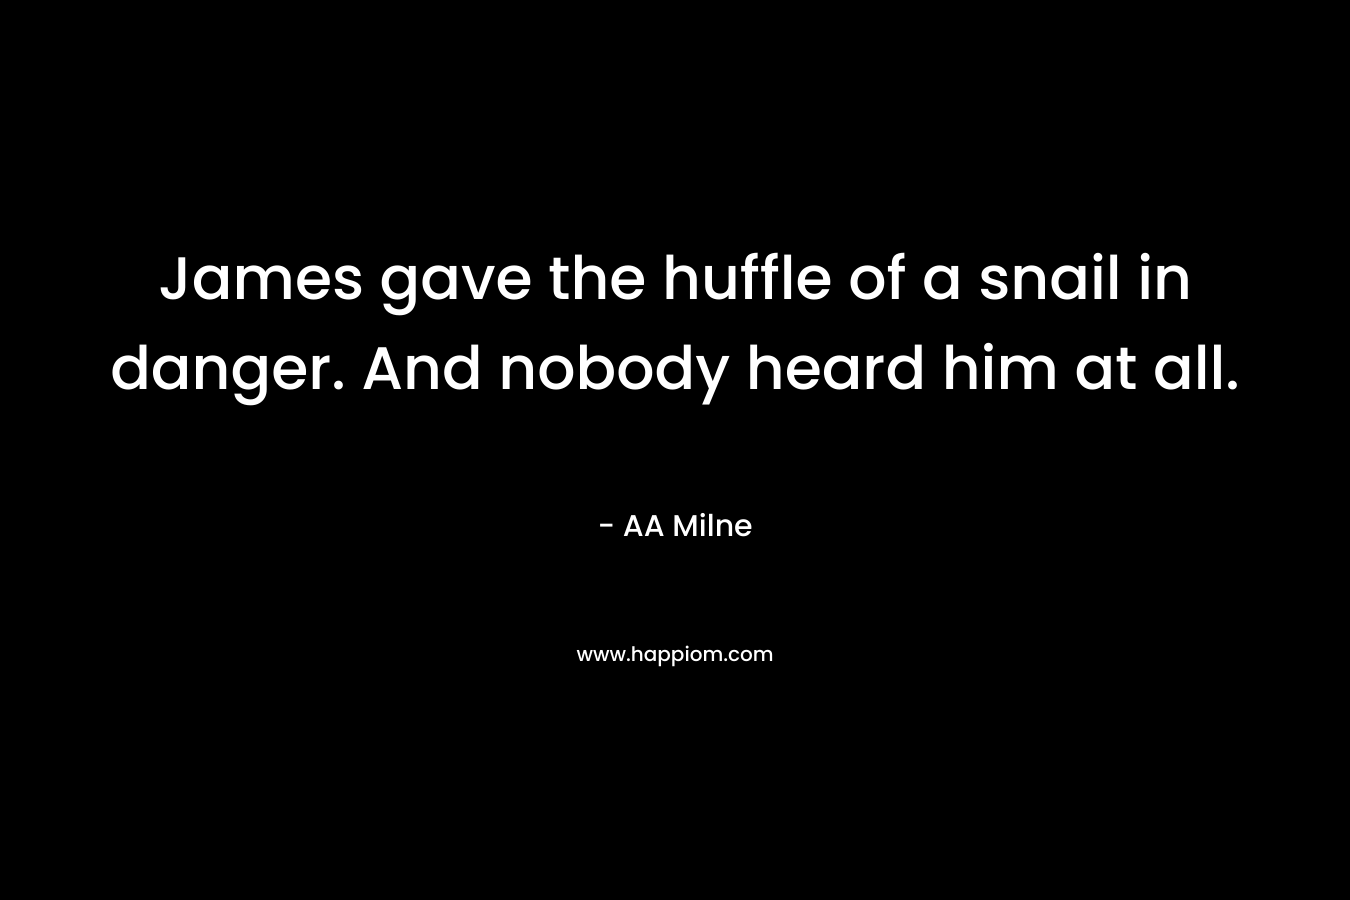 James gave the huffle of a snail in danger. And nobody heard him at all. – AA Milne